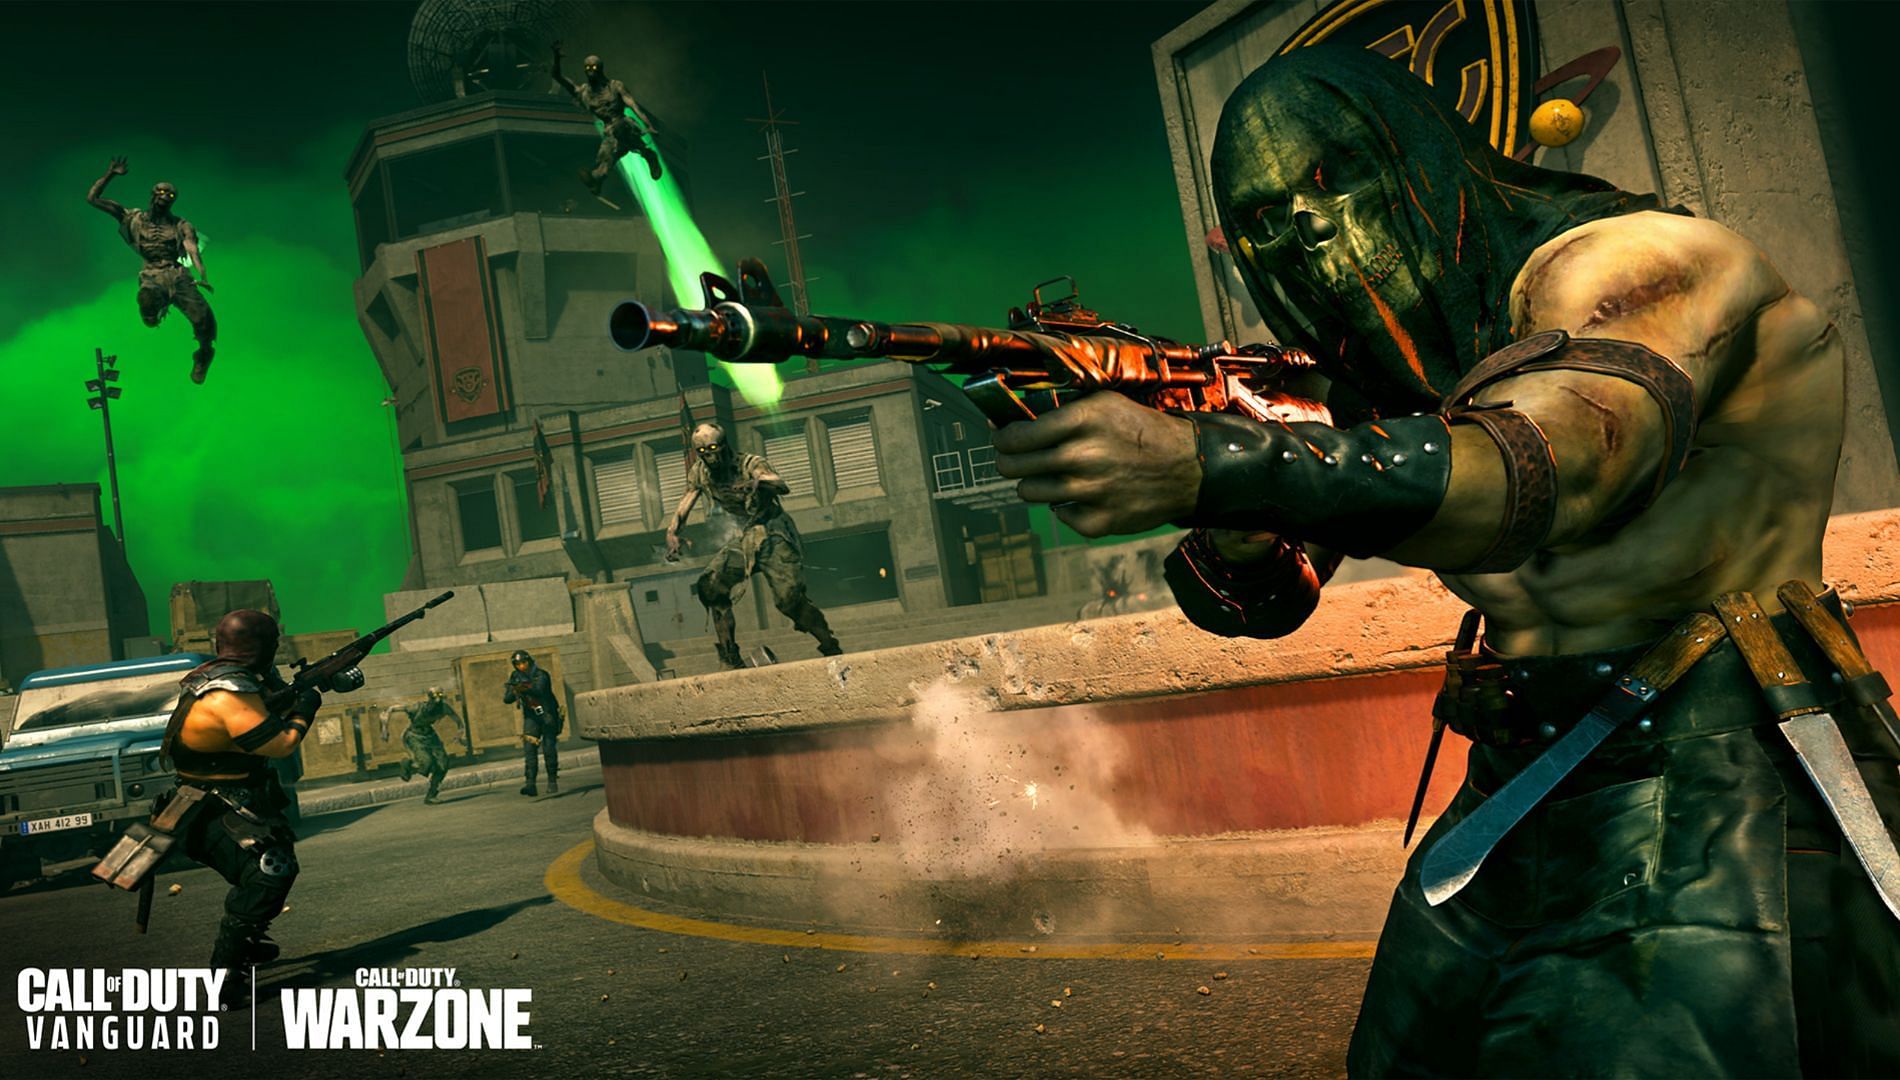 Call of Duty Warzone Season 4 Reloaded Rebirth of the Dead (Image via Activision)